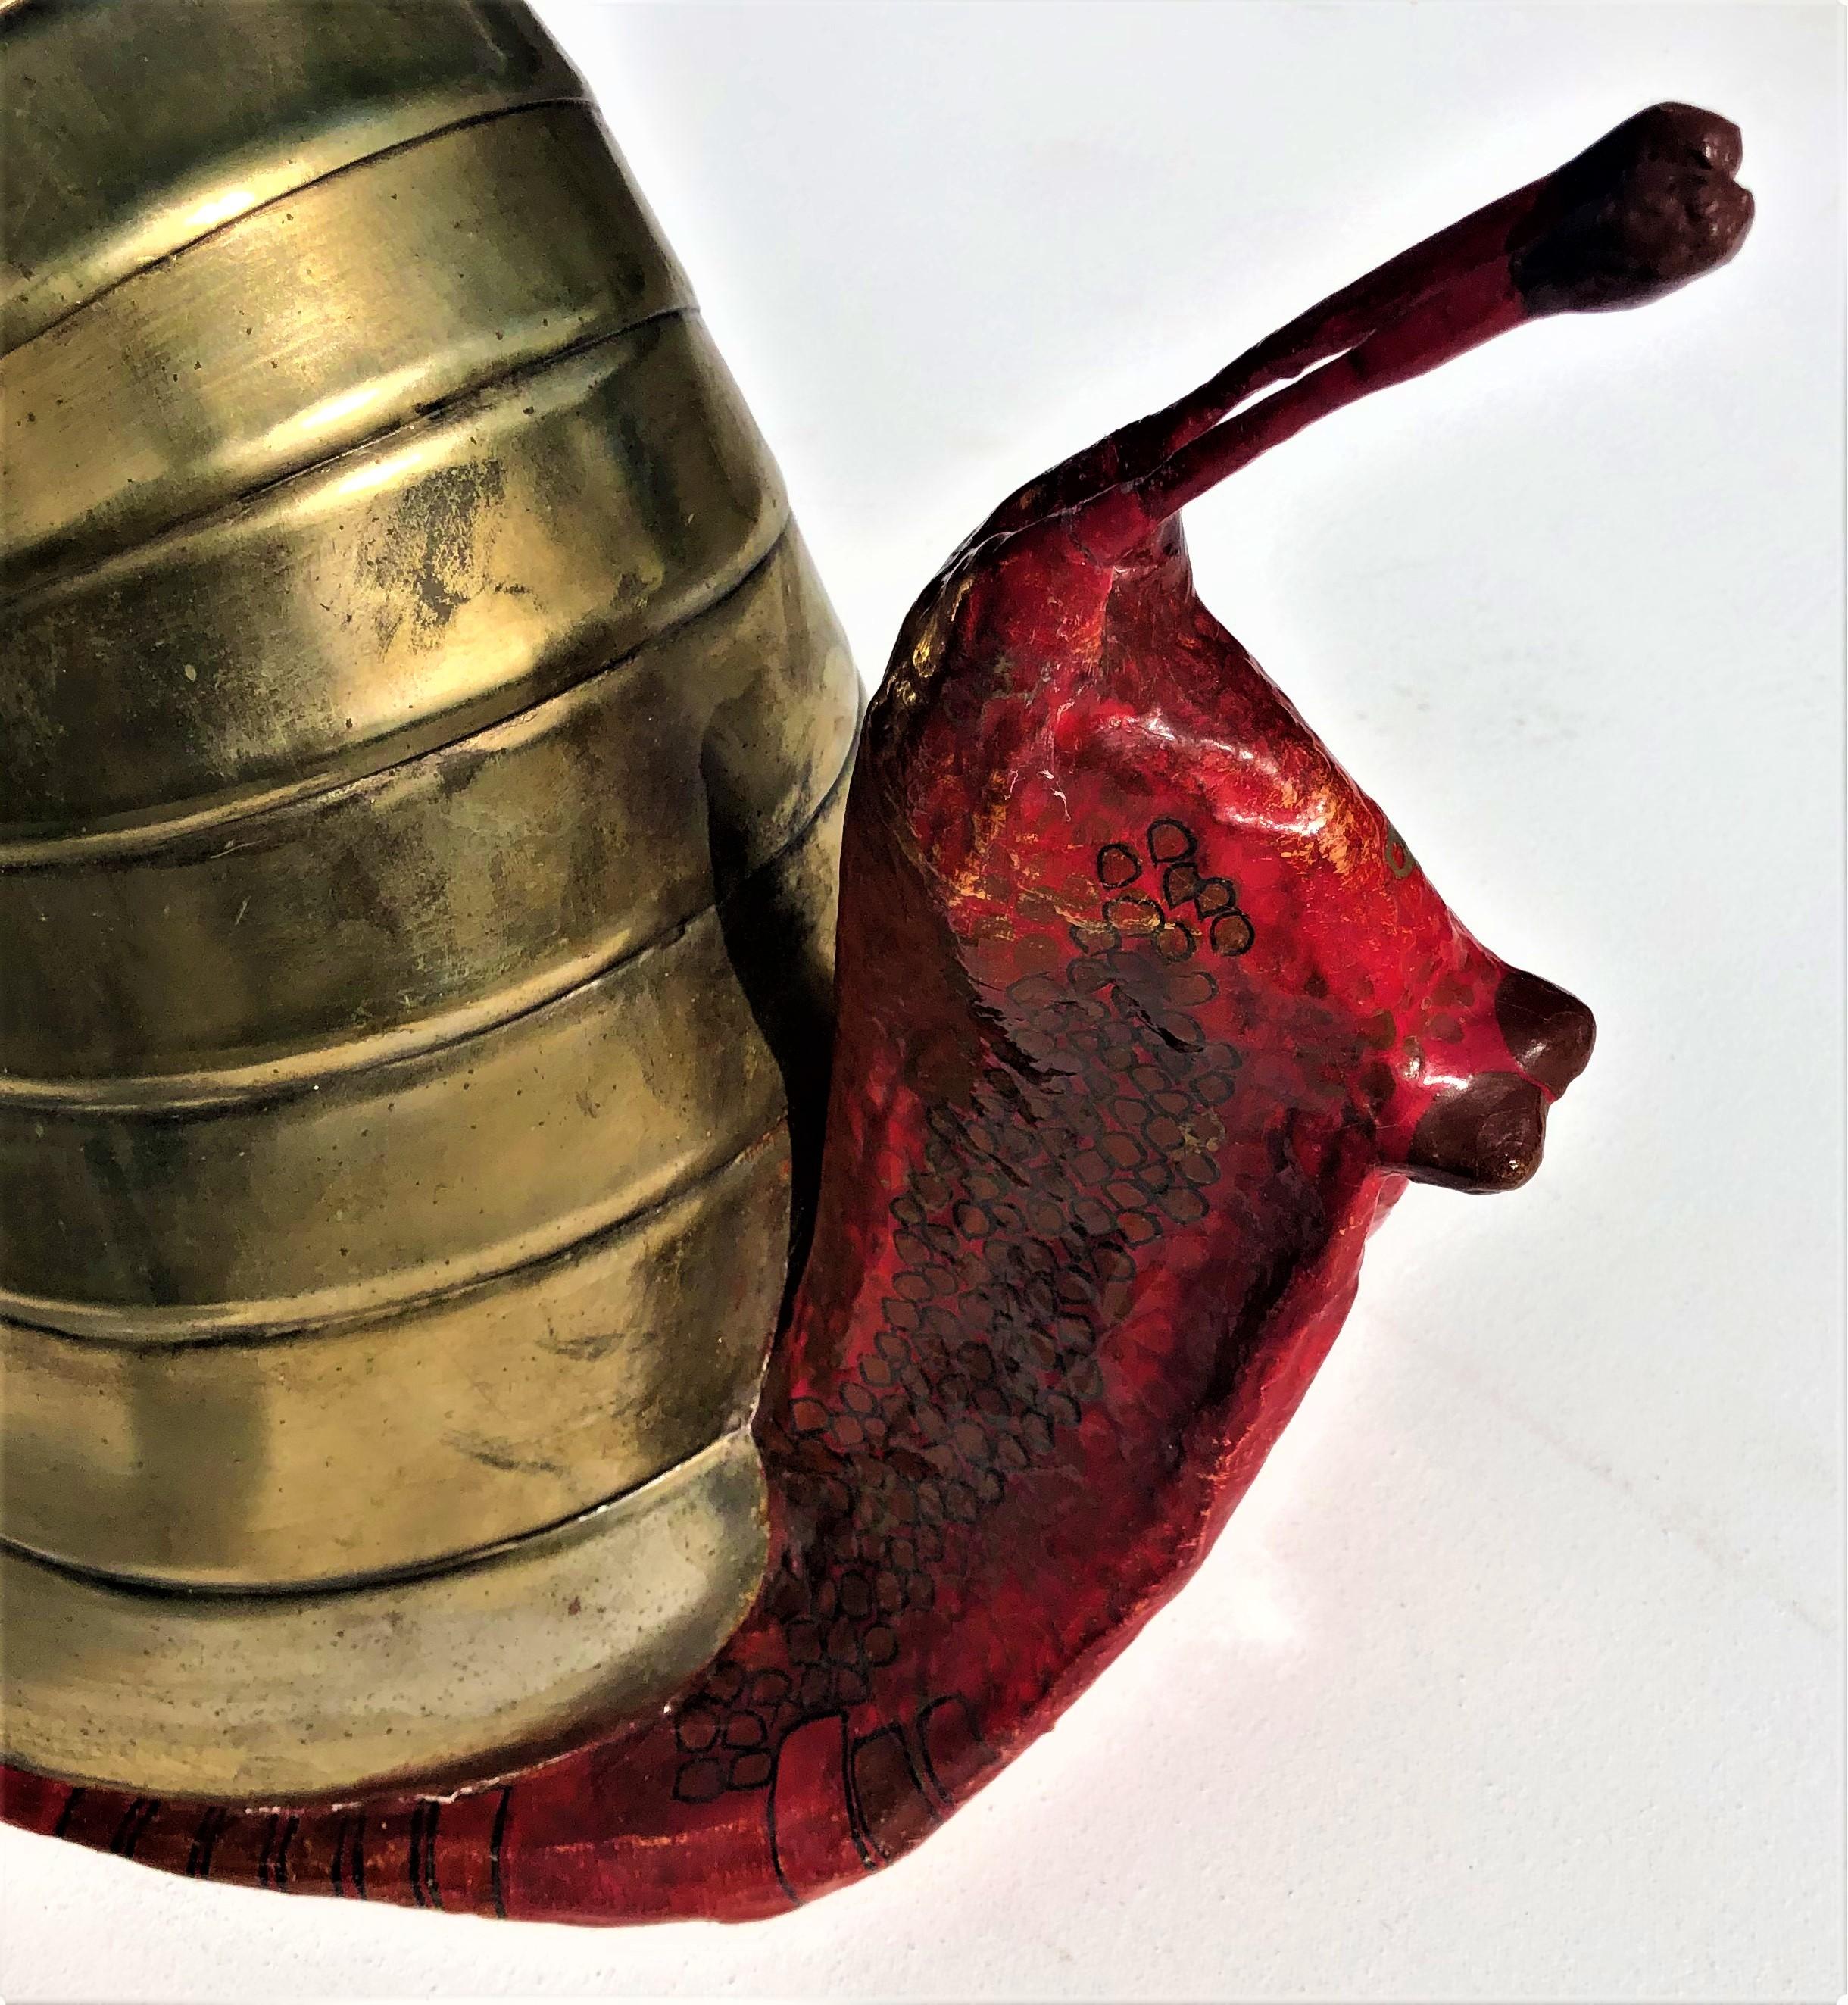 Brass Sergio Bustamante Mexican Snail Sculpture Signed 26/100, Hand Painted